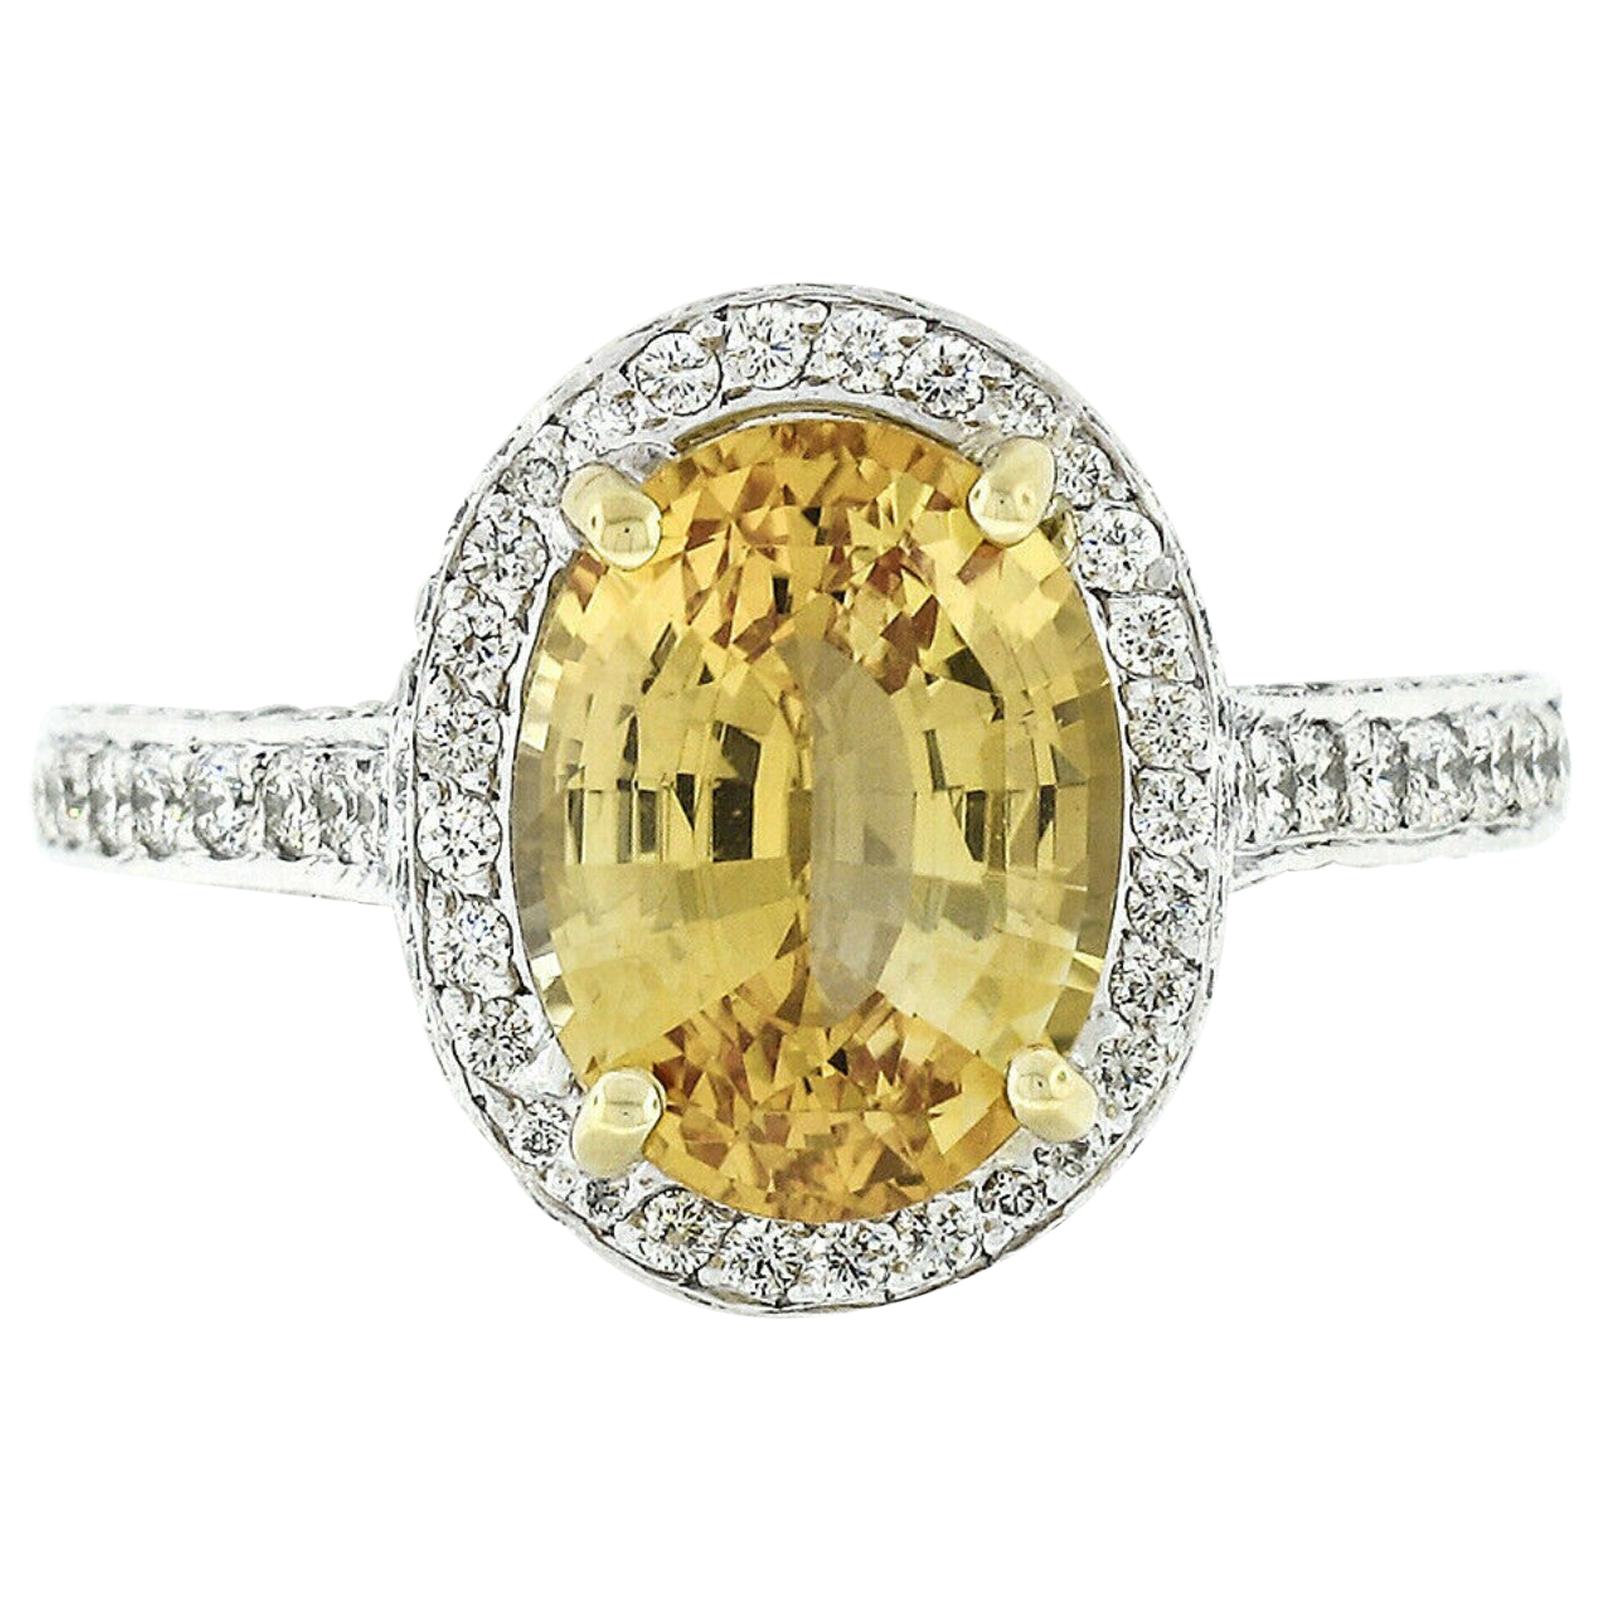 Fancy Platinum 5.6 Carat GIA Oval Yellow Sapphire and Diamond Cocktail Ring